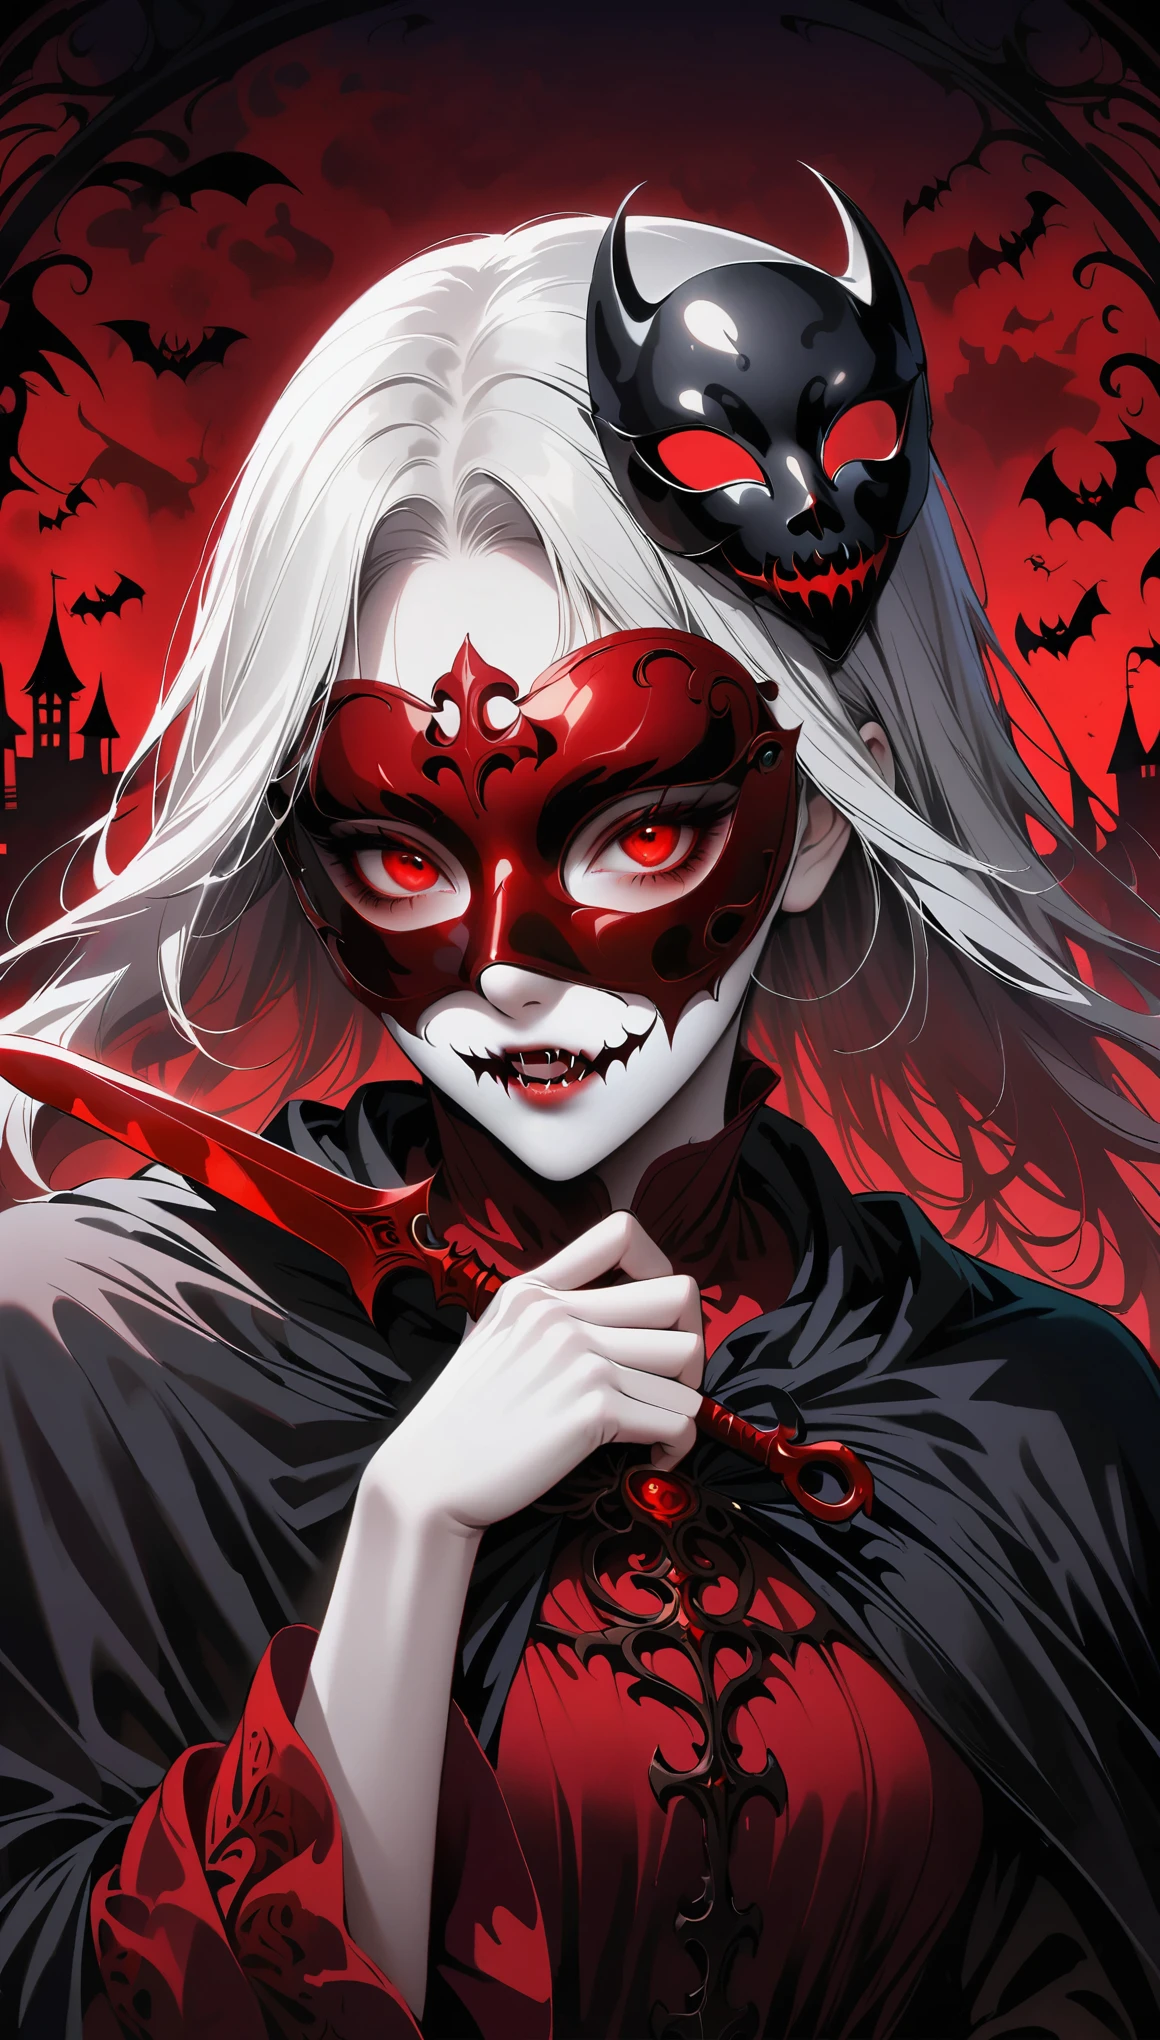 vampire,holding a dagger,scissors,wearing a mask,illustration,masterpiece:1.2,ultra-detailed,horror,sharp focus,dark and mysterious lighting,red color scheme,long fangs,glowing eyes,pale skin,fierce expression,Renaissance art-style,flowing cape,blood splatters,dramatic pose,halloween vibes,gothic atmosphere,tension and suspense,intricate details,moonlit night backdrop,hauntingly beautiful,ancient castle in the background,ominous shadows